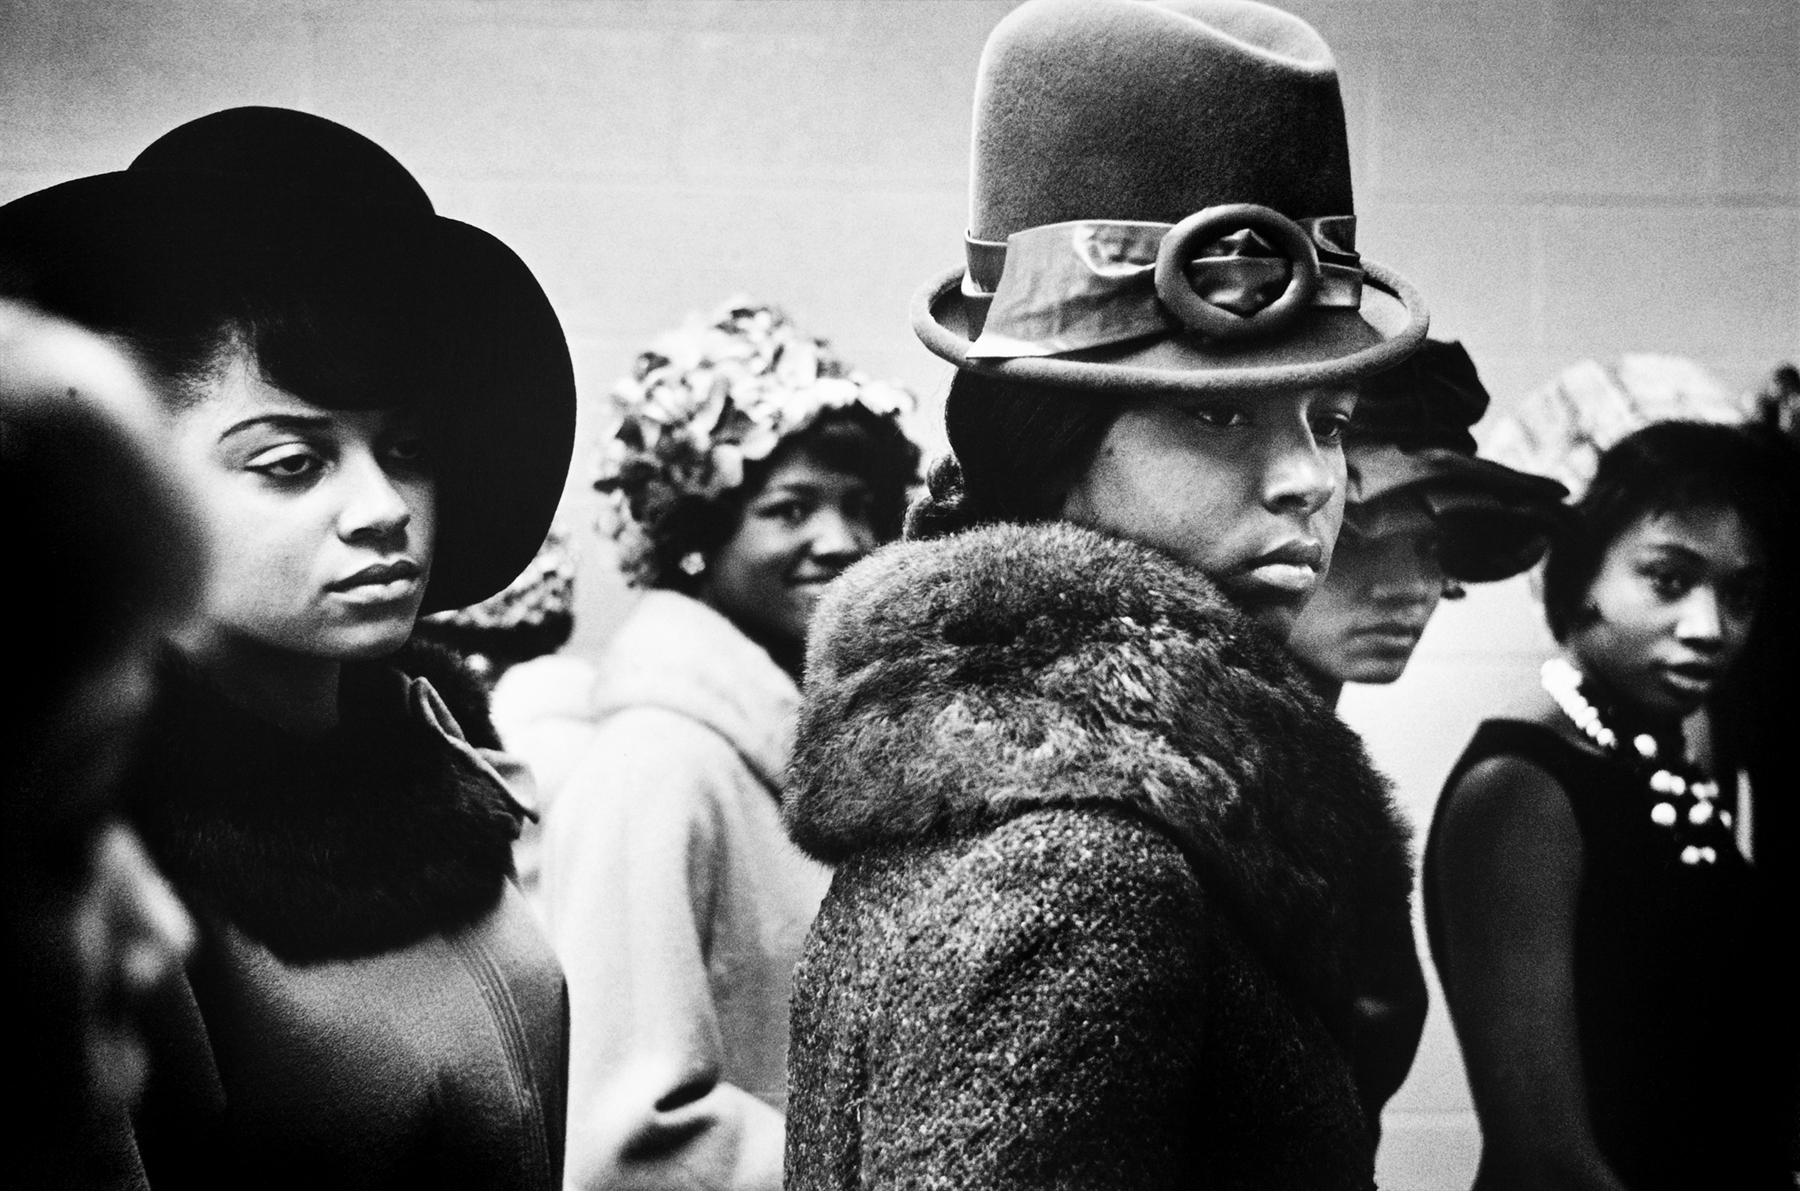 Photograph of African American women in the Harlem Fashion Show in Harlem in 1963, taken by Leonard Freed